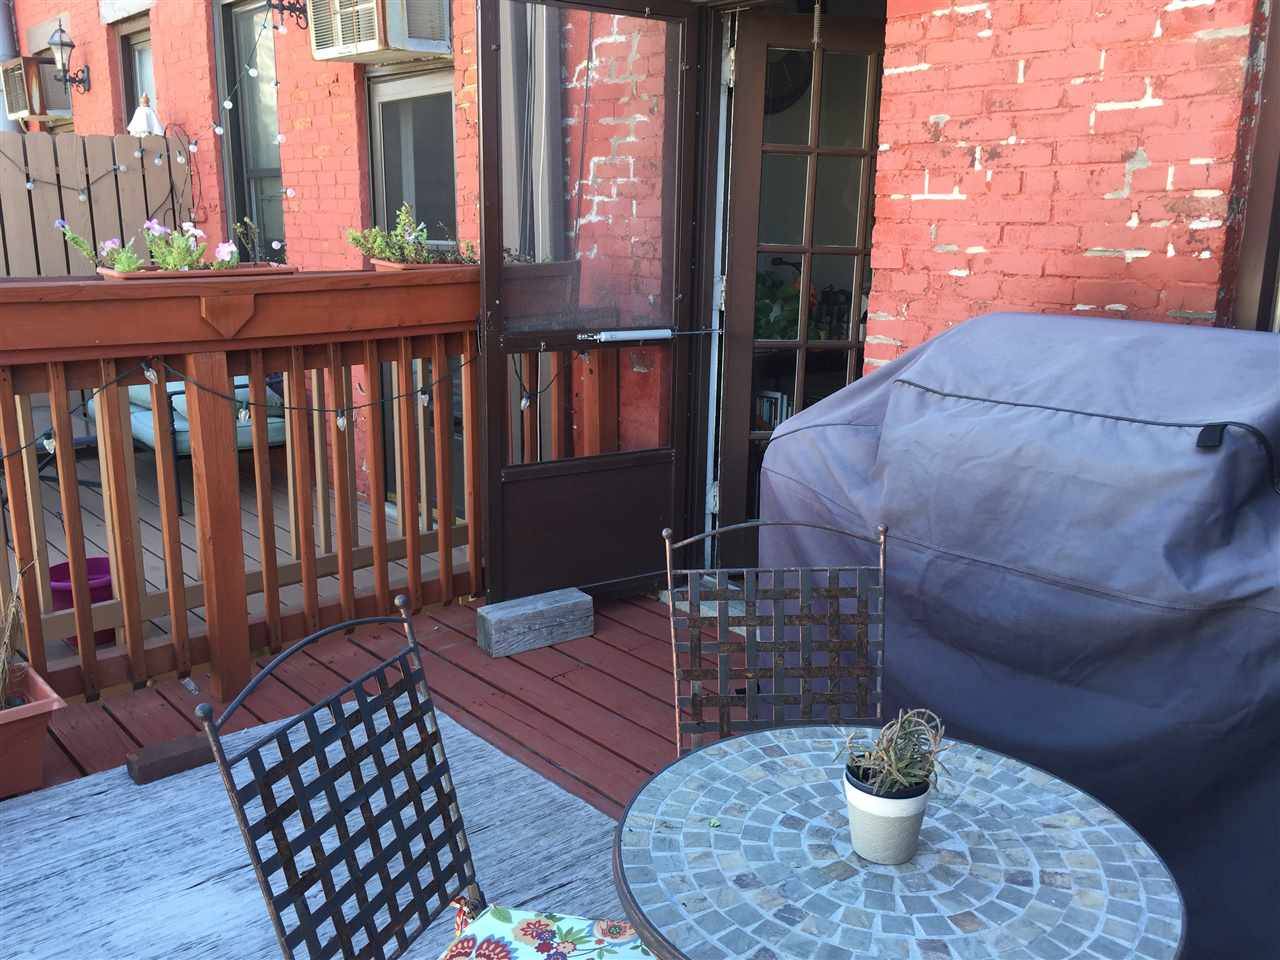 Spacious one bedroom plus sleeping loft one bath home in the desirable Paulus Hook section of downtown JC is ready for your arrival on August 15th